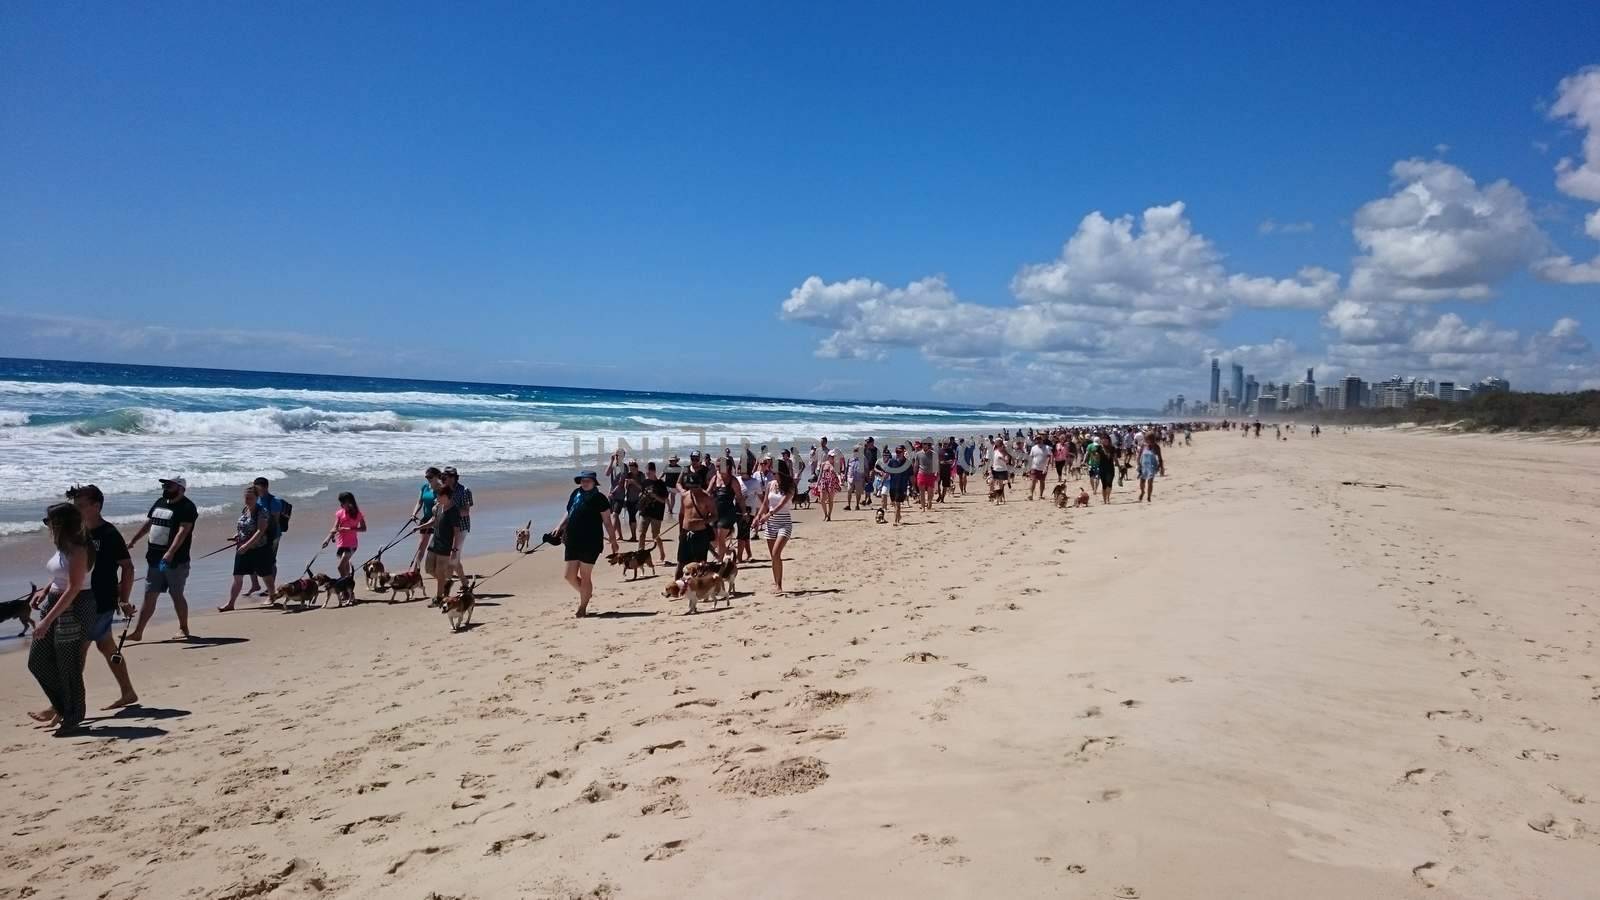 AUSTRALIA, Gold Coast: More than 400 beagles and their owners walk along the beach at The Spit on Queensland's Gold Coast on December 6, 2015. Organisers said the gathering of beagles was the largest of its kind to date in Australia, and also topped an unofficial world record previously set by a group of 200 beagles in the US. 